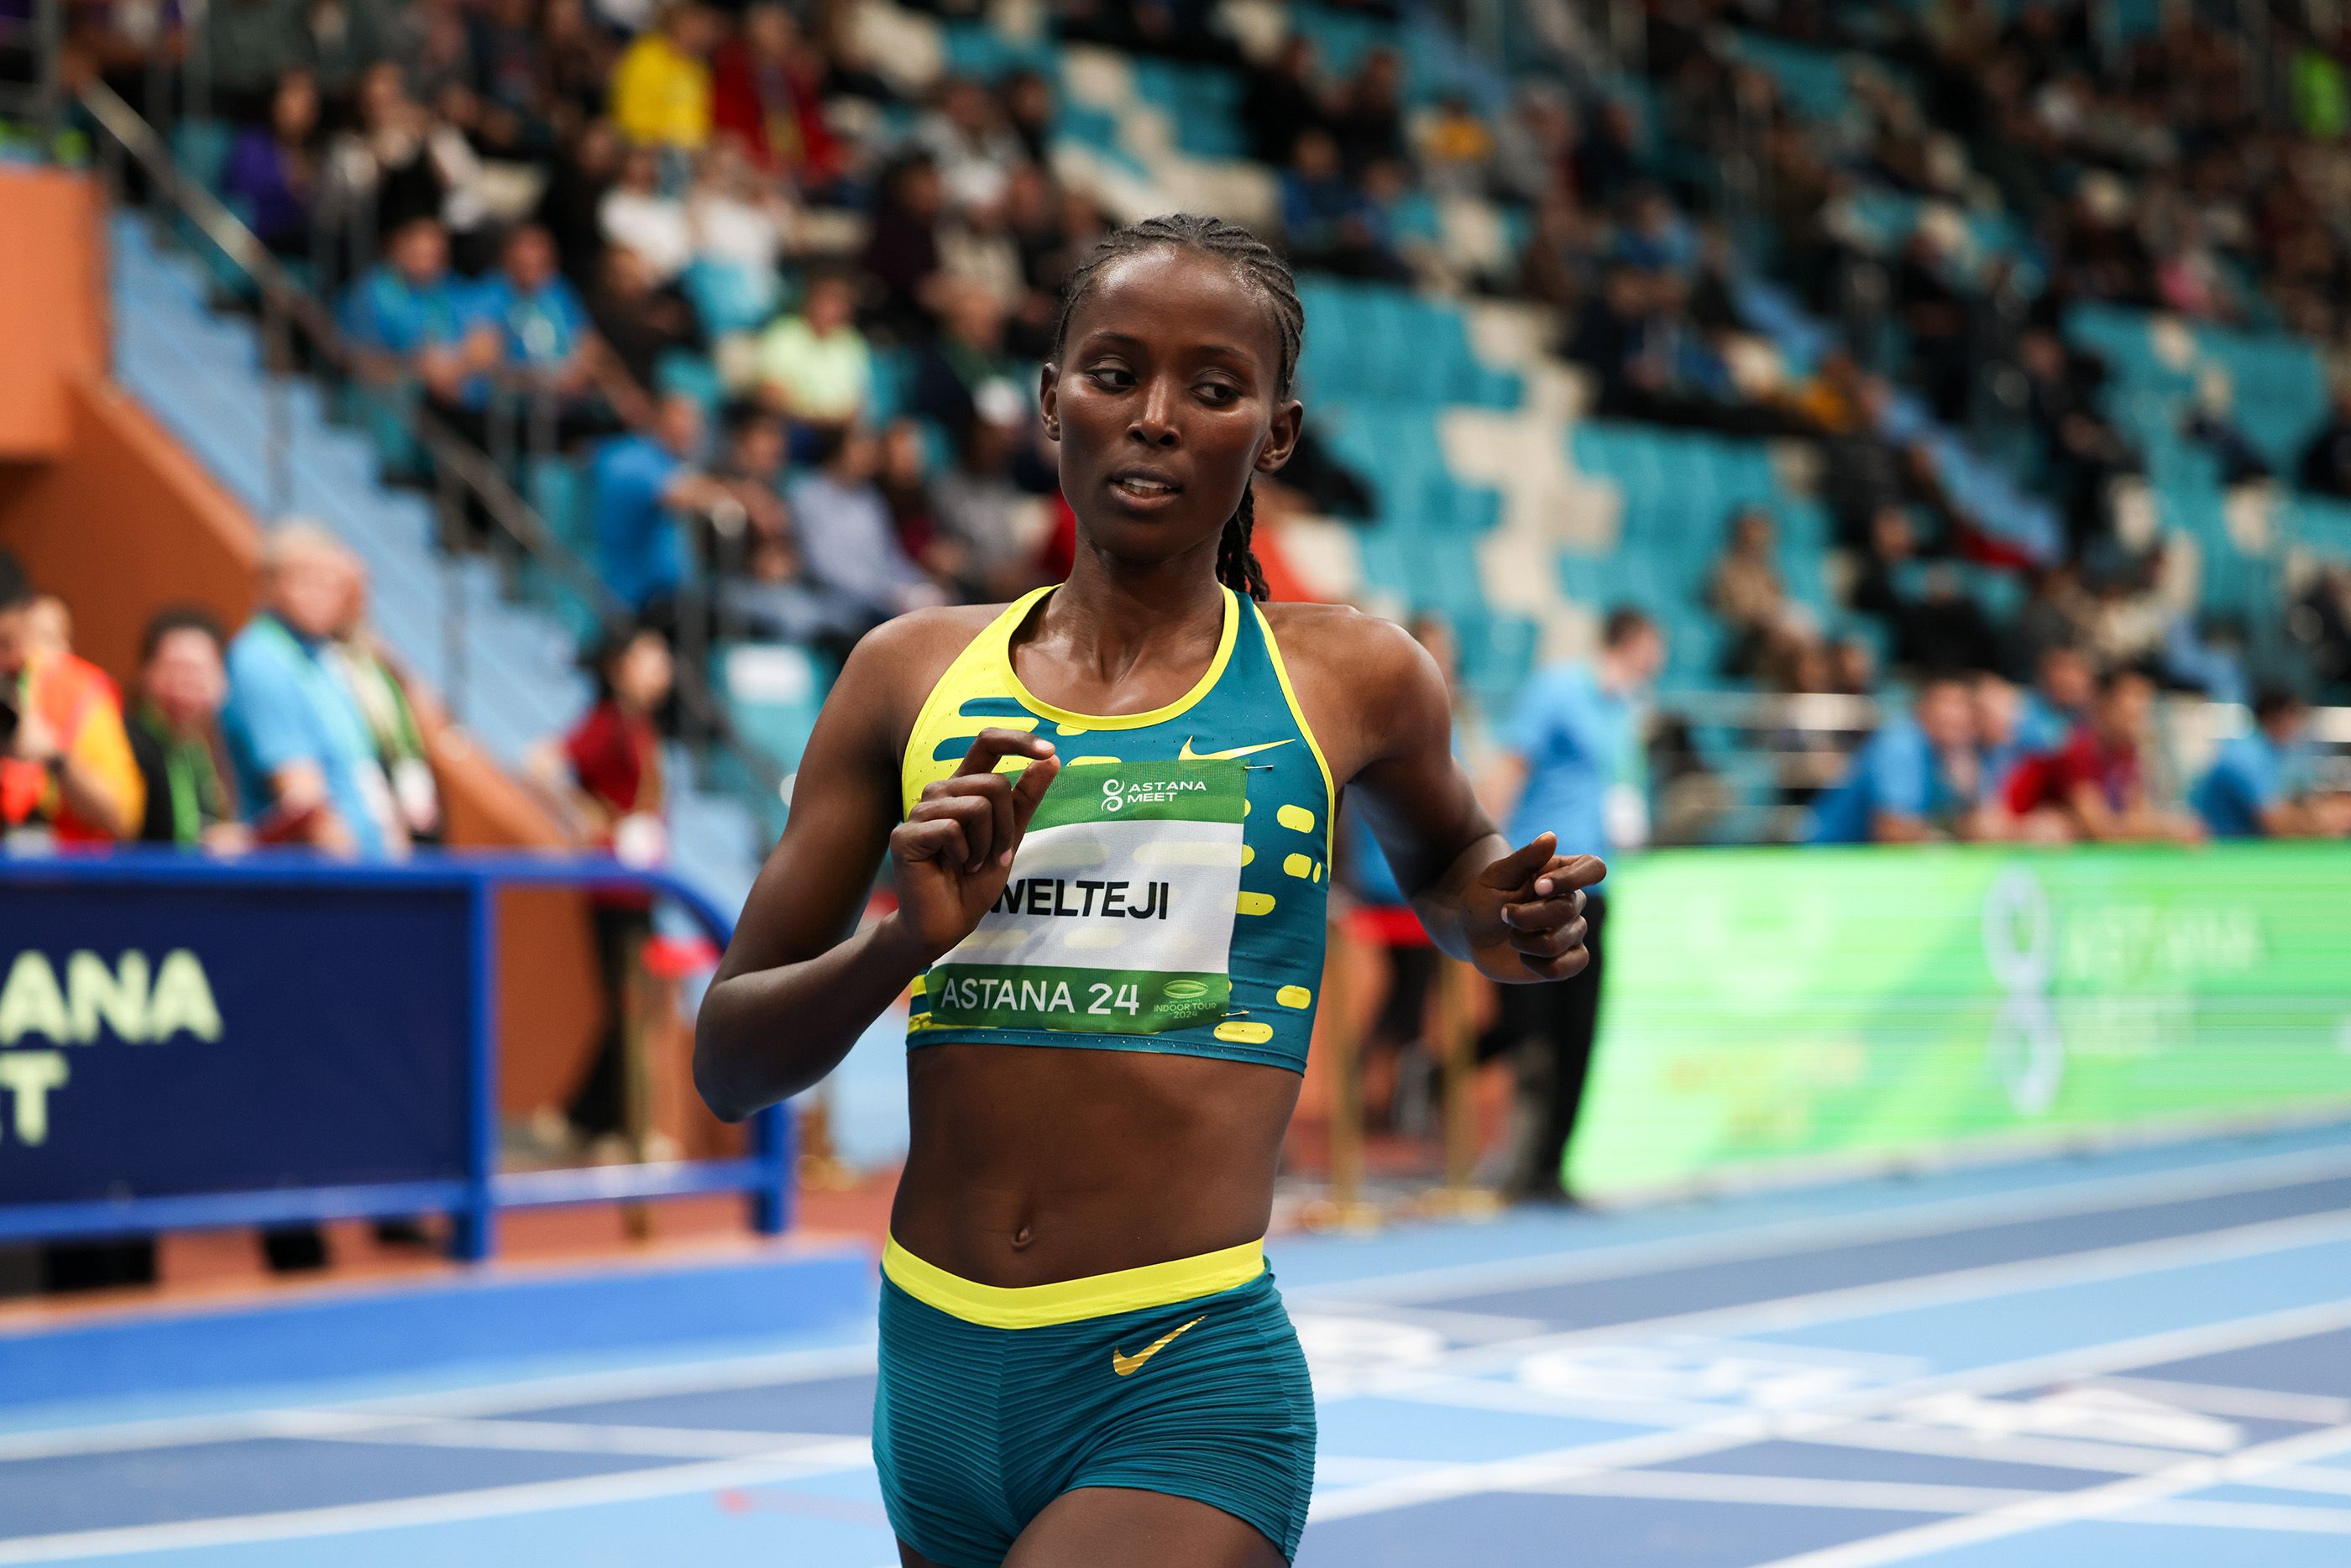 Diribe Welteji wins the mile at the World Athletics Indoor Tour Gold meeting in Astana